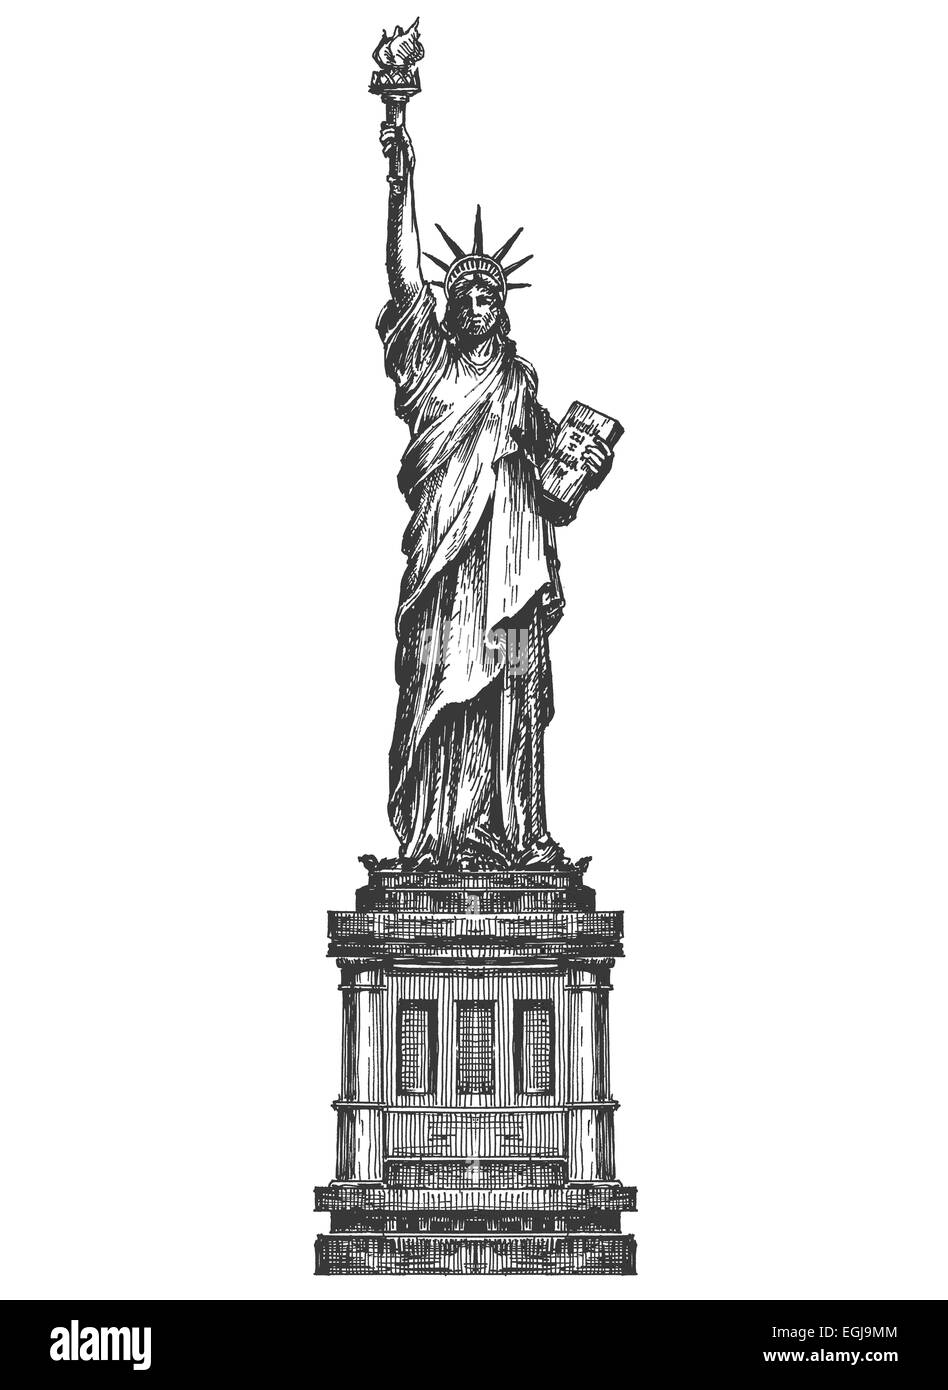 America. Statue of liberty on a white background. sketch Stock Photo